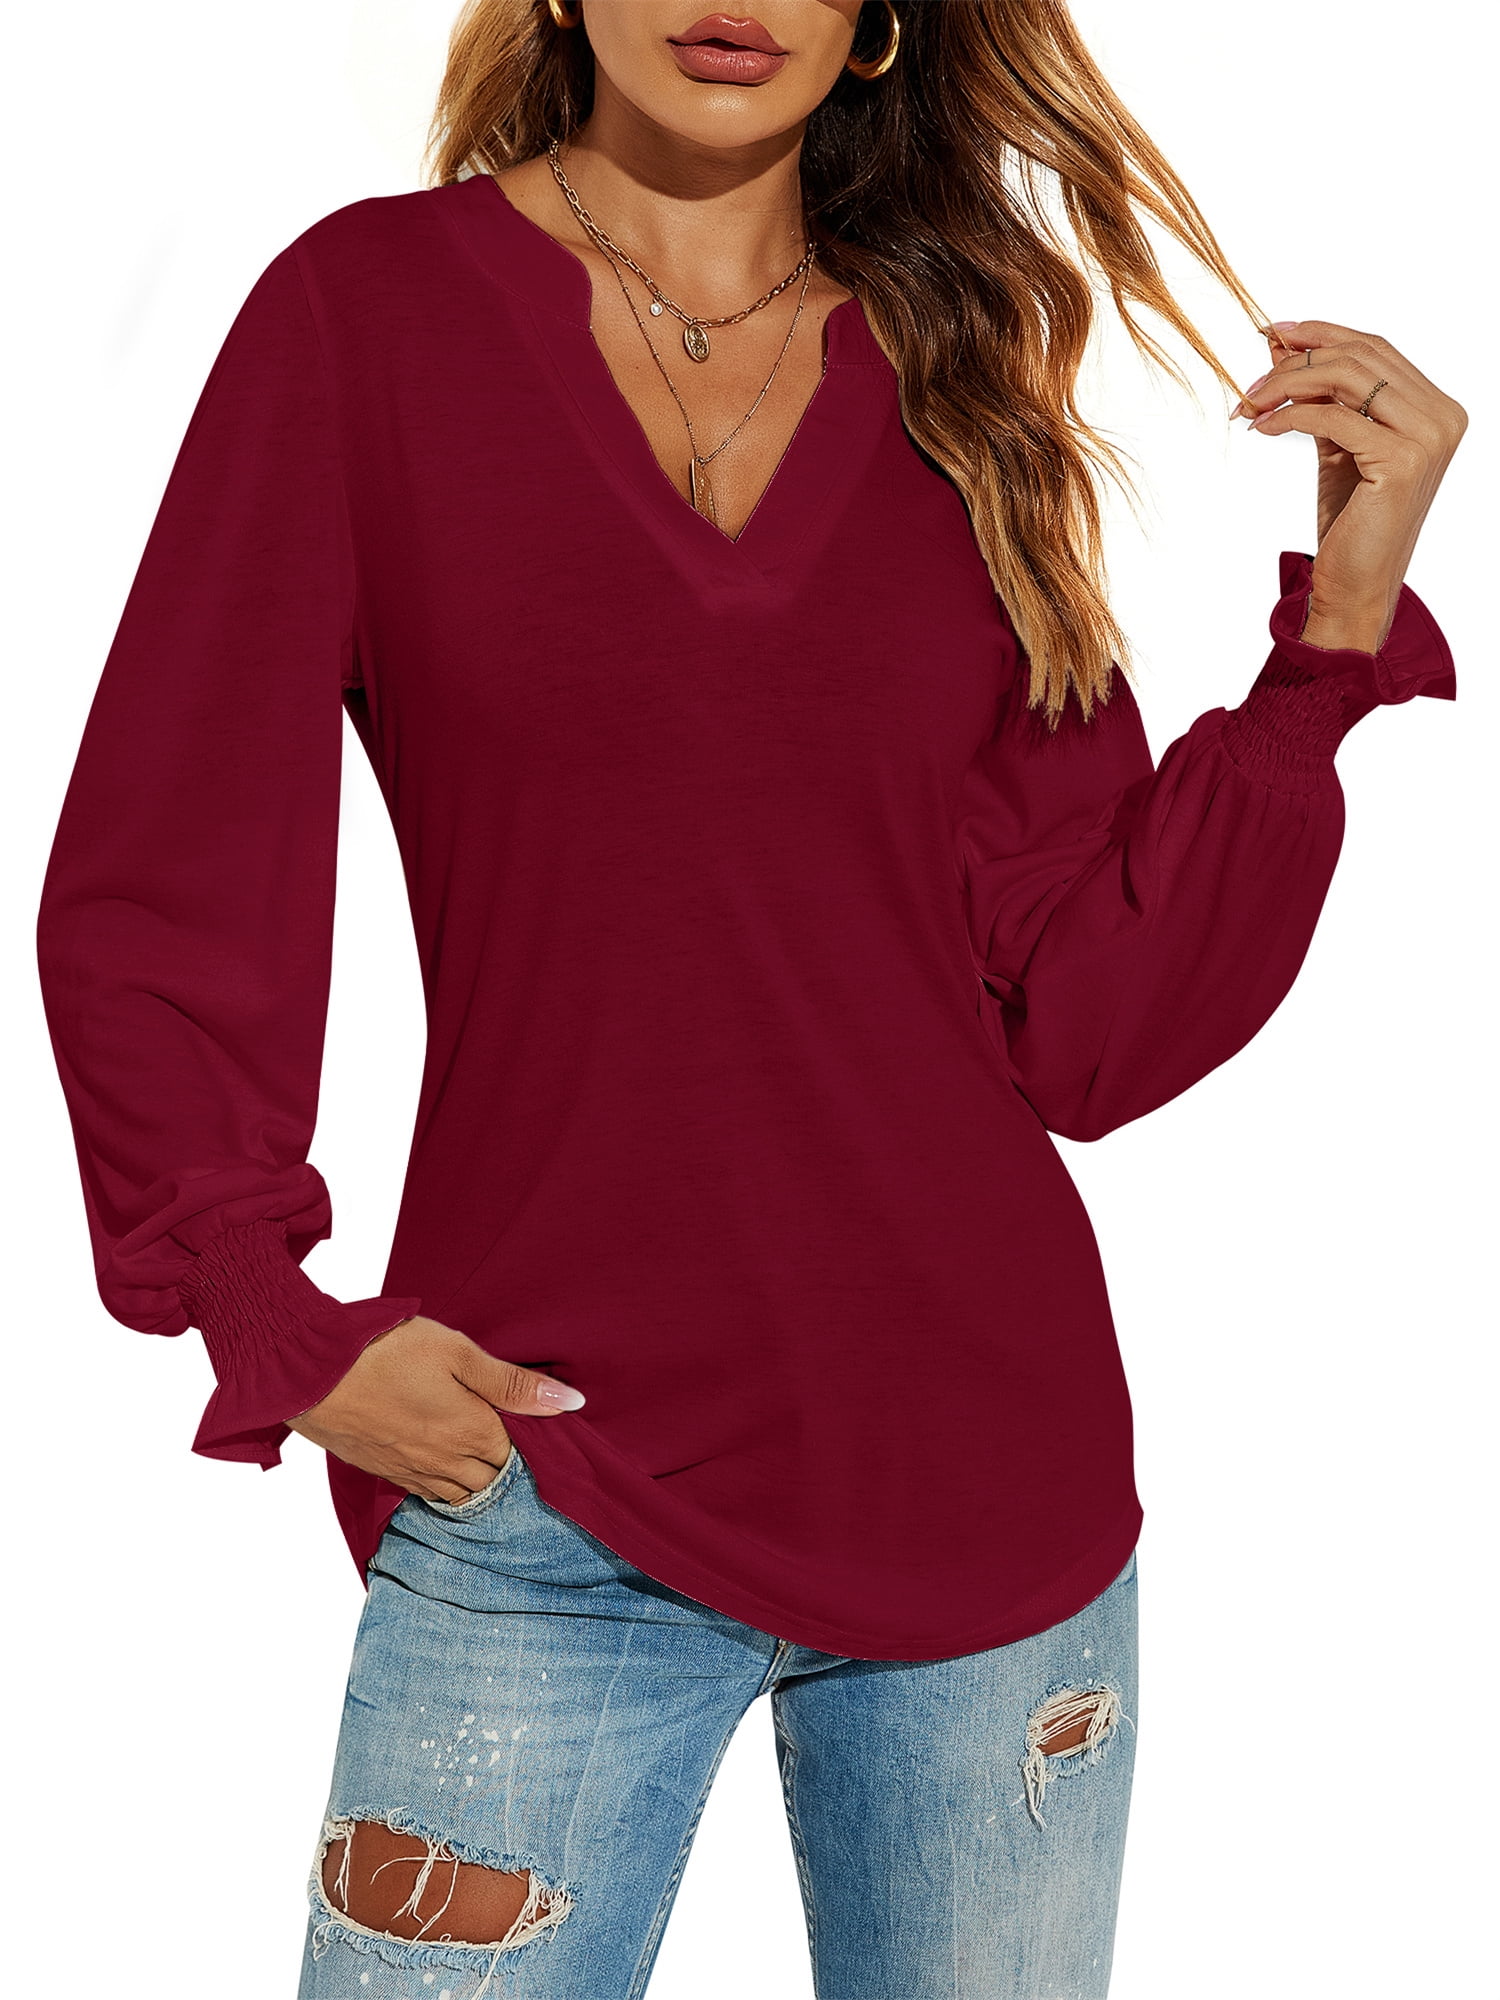 LOMON Women's Casual Puff Long Sleeve Tunic Tops V-Neck Pleated Flare ...